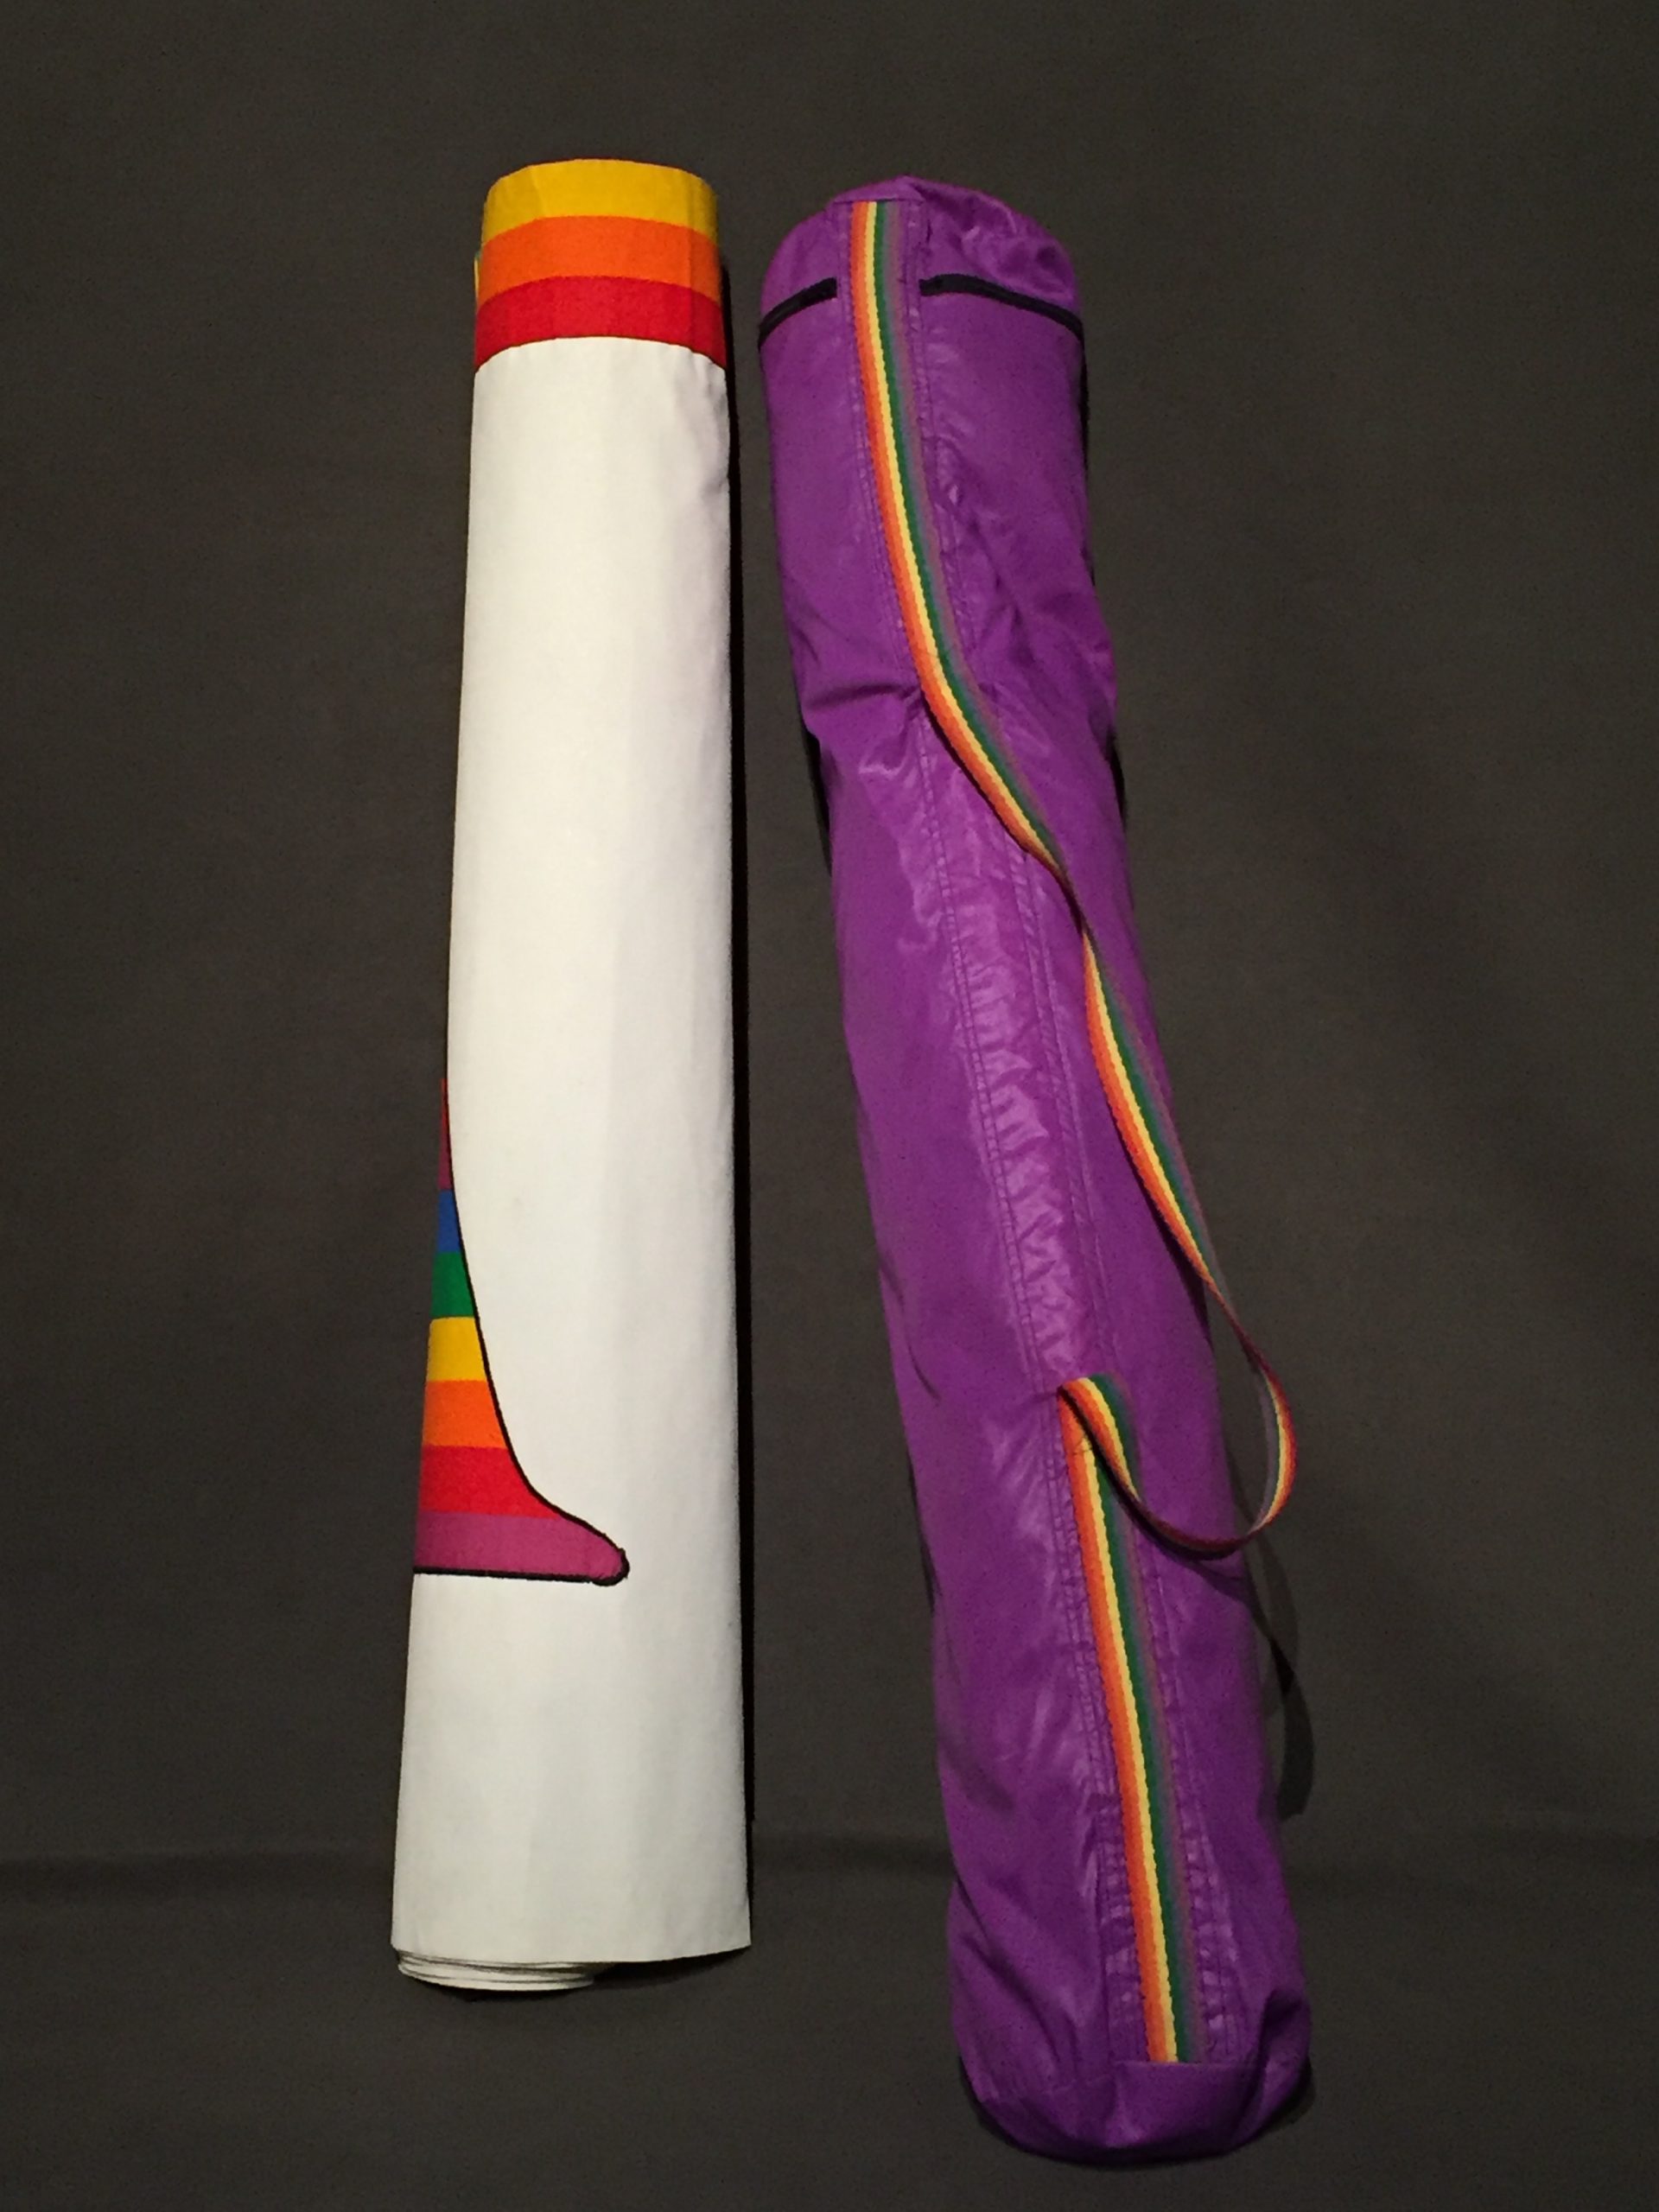 Purple bag with rainbow strap and banner nested inside. Banner is rolled up but rainbow insignia is visible.